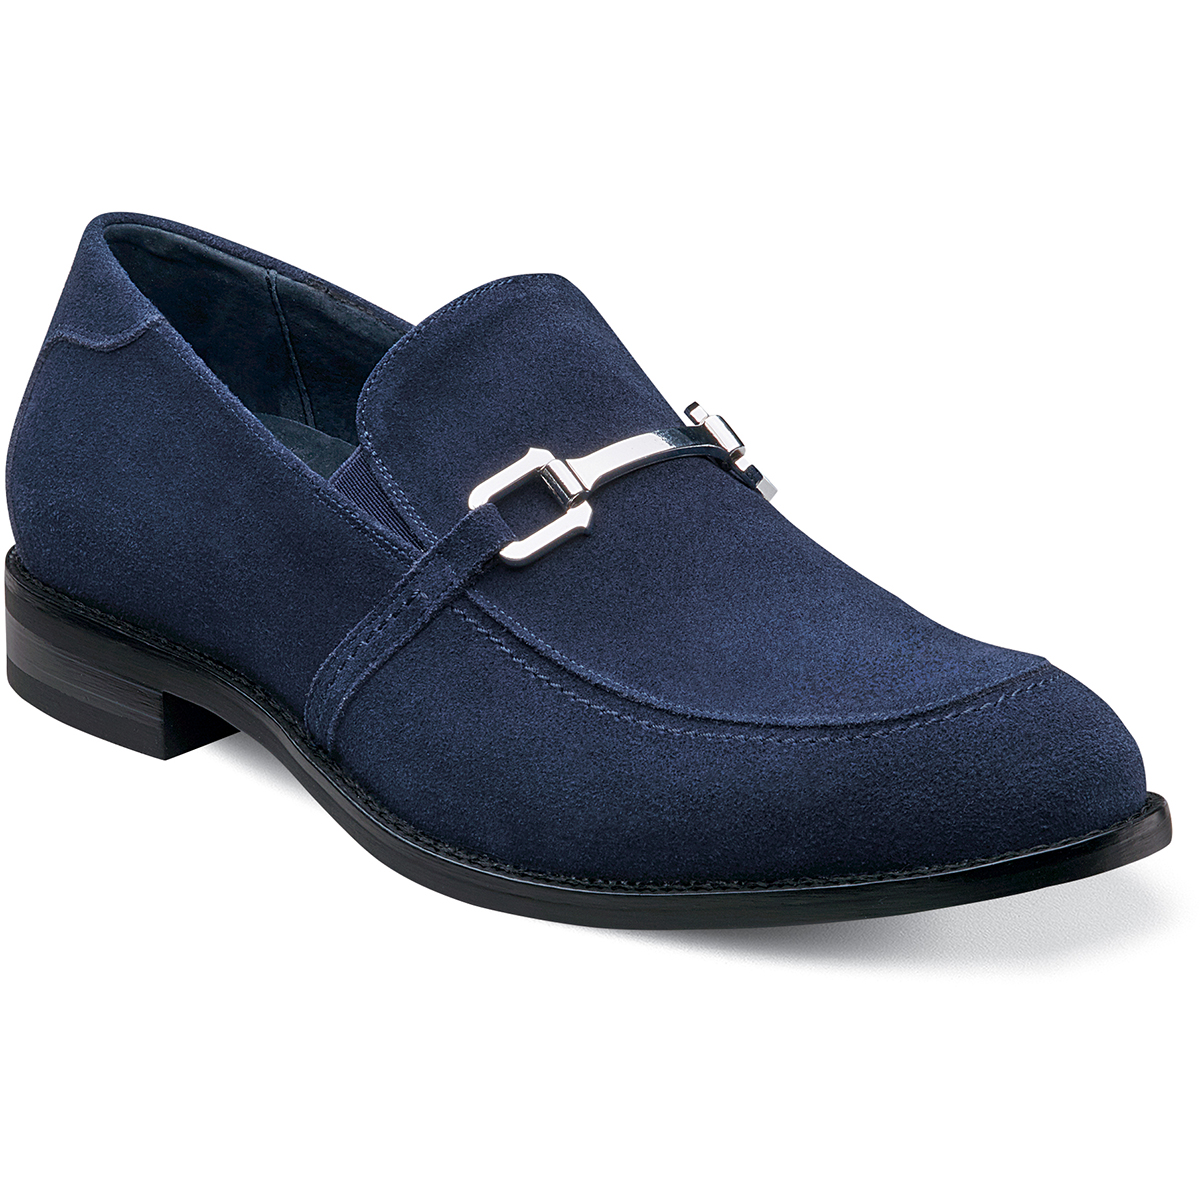 Clearance Shoes | Navy Moc Toe Slip On | Stacy Adams Gulliver